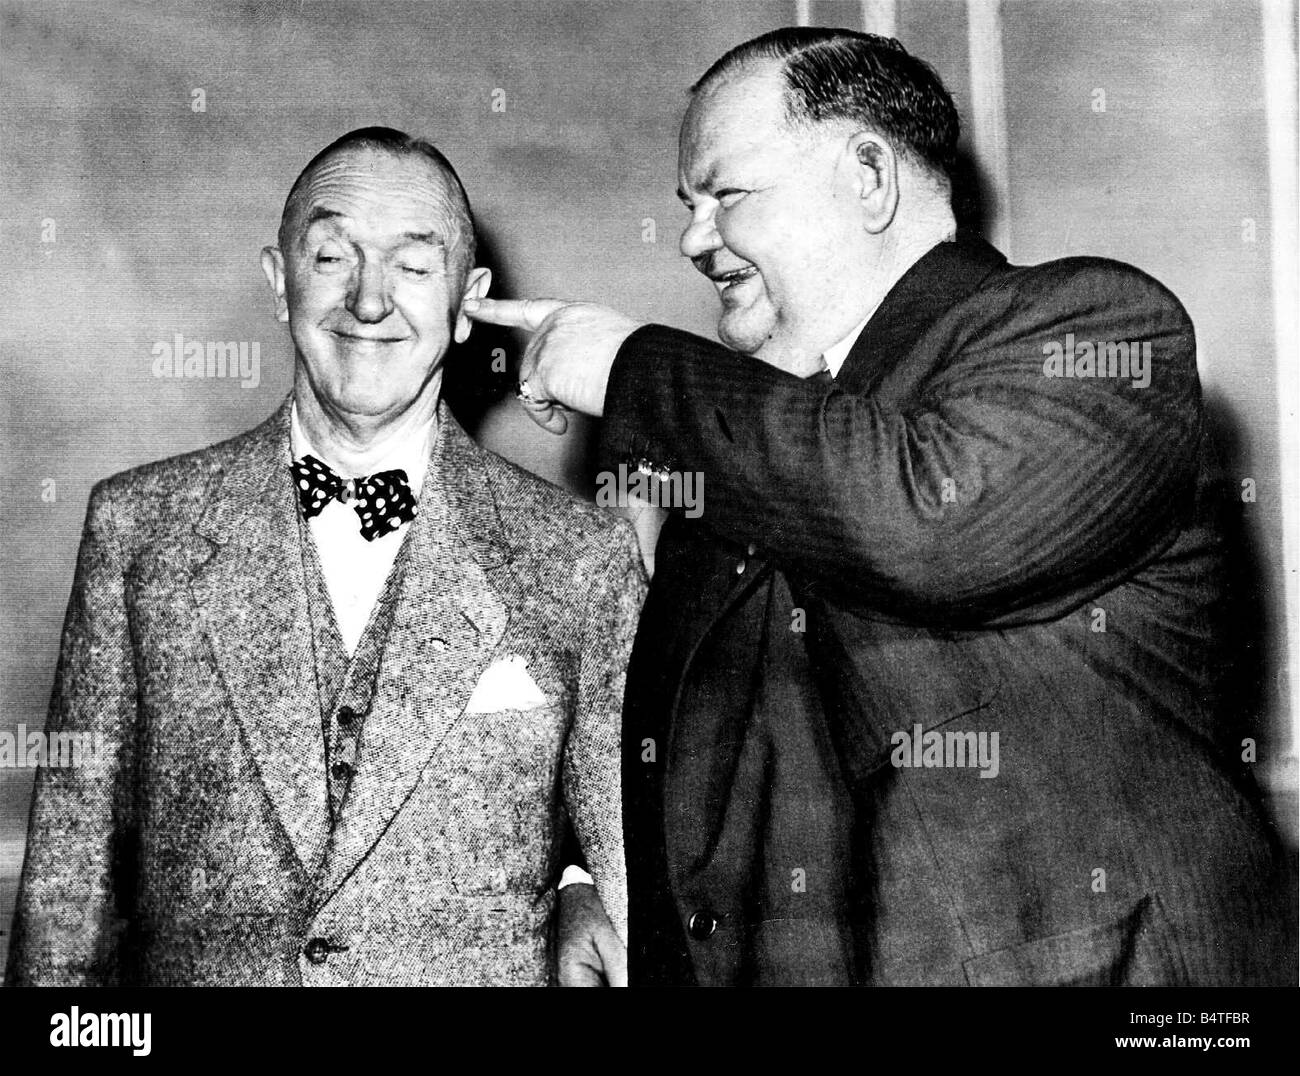 Laurel Hardy Comedy duo Stan Laurel and Oliver Hardy Stan Laurel and Oliver Hardy at a London hotel reception T Washington Hotel prior to their tour of Manchester Liverpool and Newcastle Stock Photo